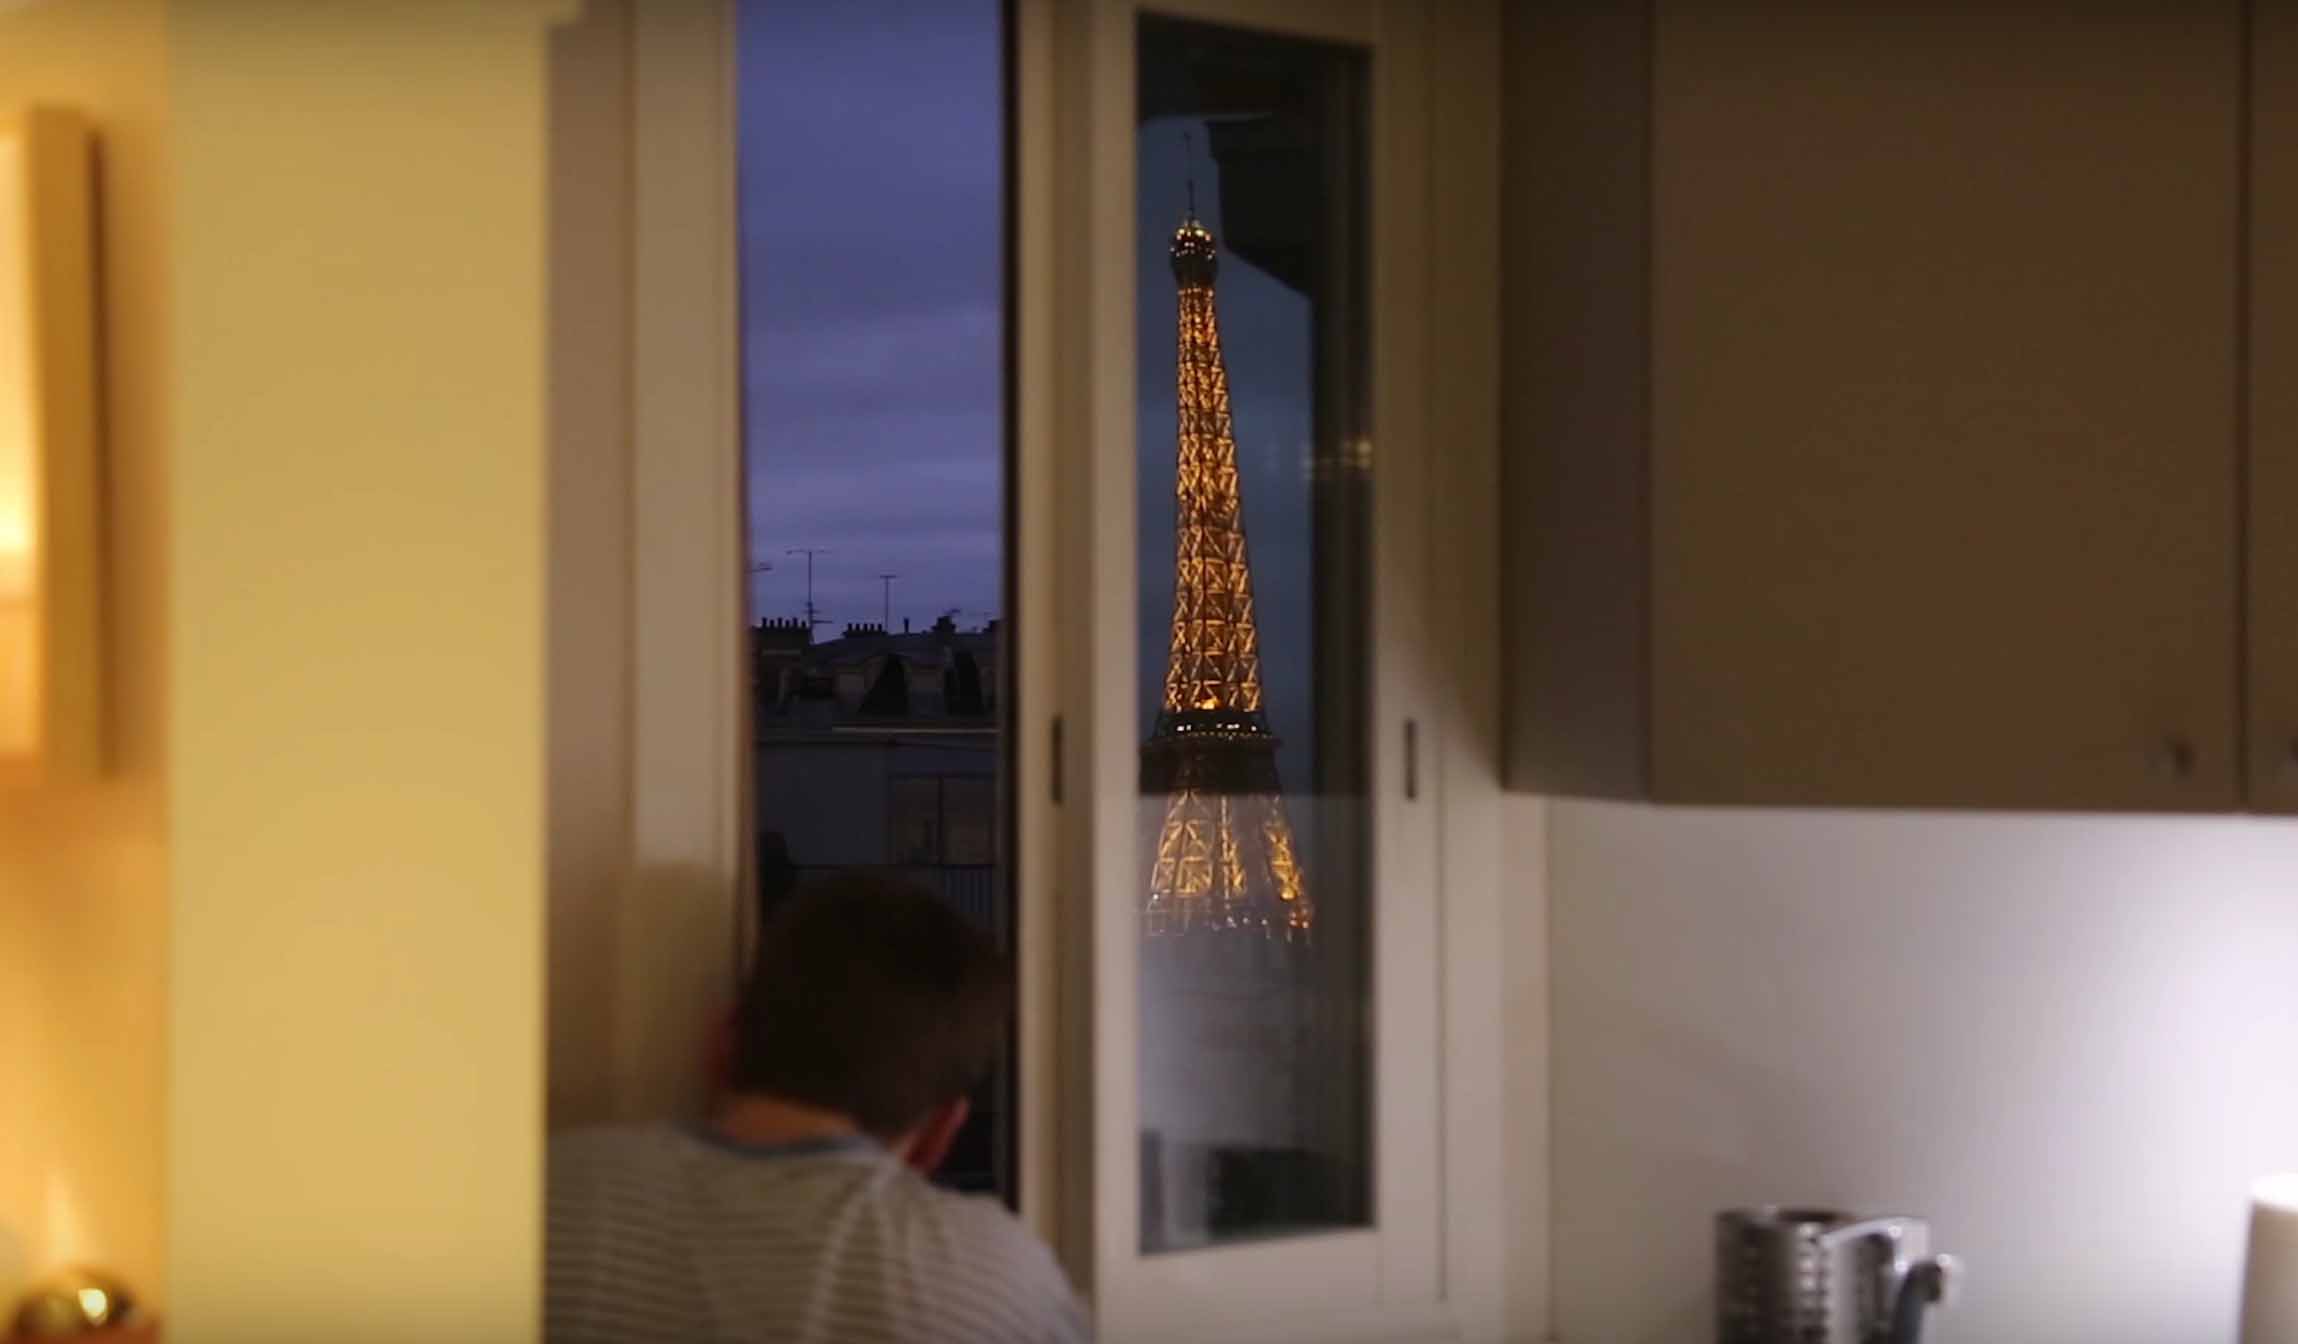 A nighttime view of the Eiffel Tower from a bedroom window in Paris, France thanks to French Redditor Lurluberlu’s giant periscope.